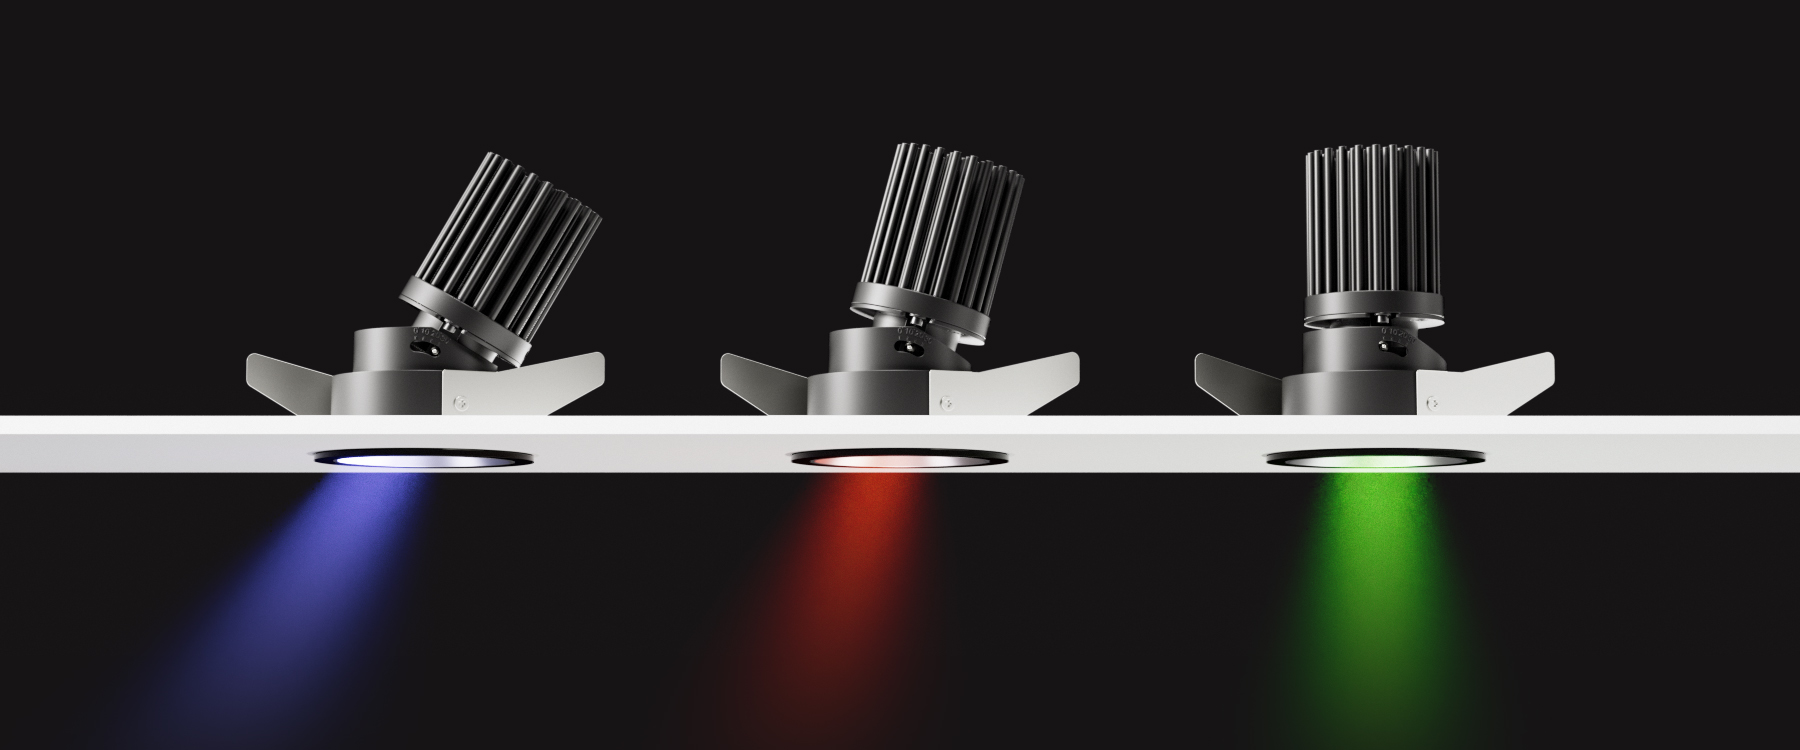 Our unique W+RGB color-changing solution now comes in the smallest size yet and is compatible with the REV Flex 2. Whether you need high-performance white illumination or dynamic color transformations, you can now achieve it all from a single light source.